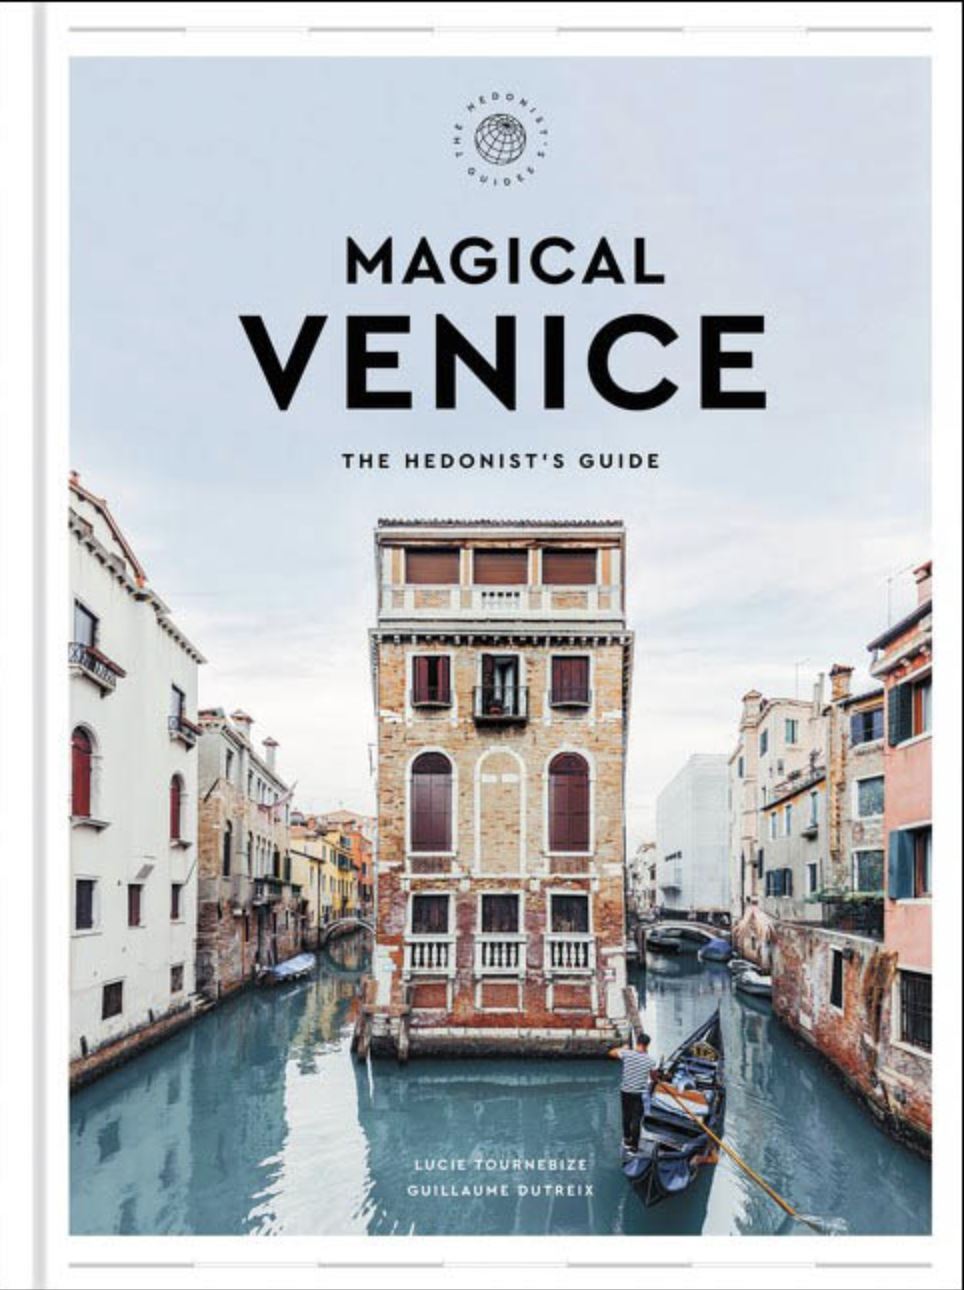 Magical Venice () The Hedonist’s Guide Lucie Tournebize & Guillaume Dutreix, translated by Zachary R. Townsend